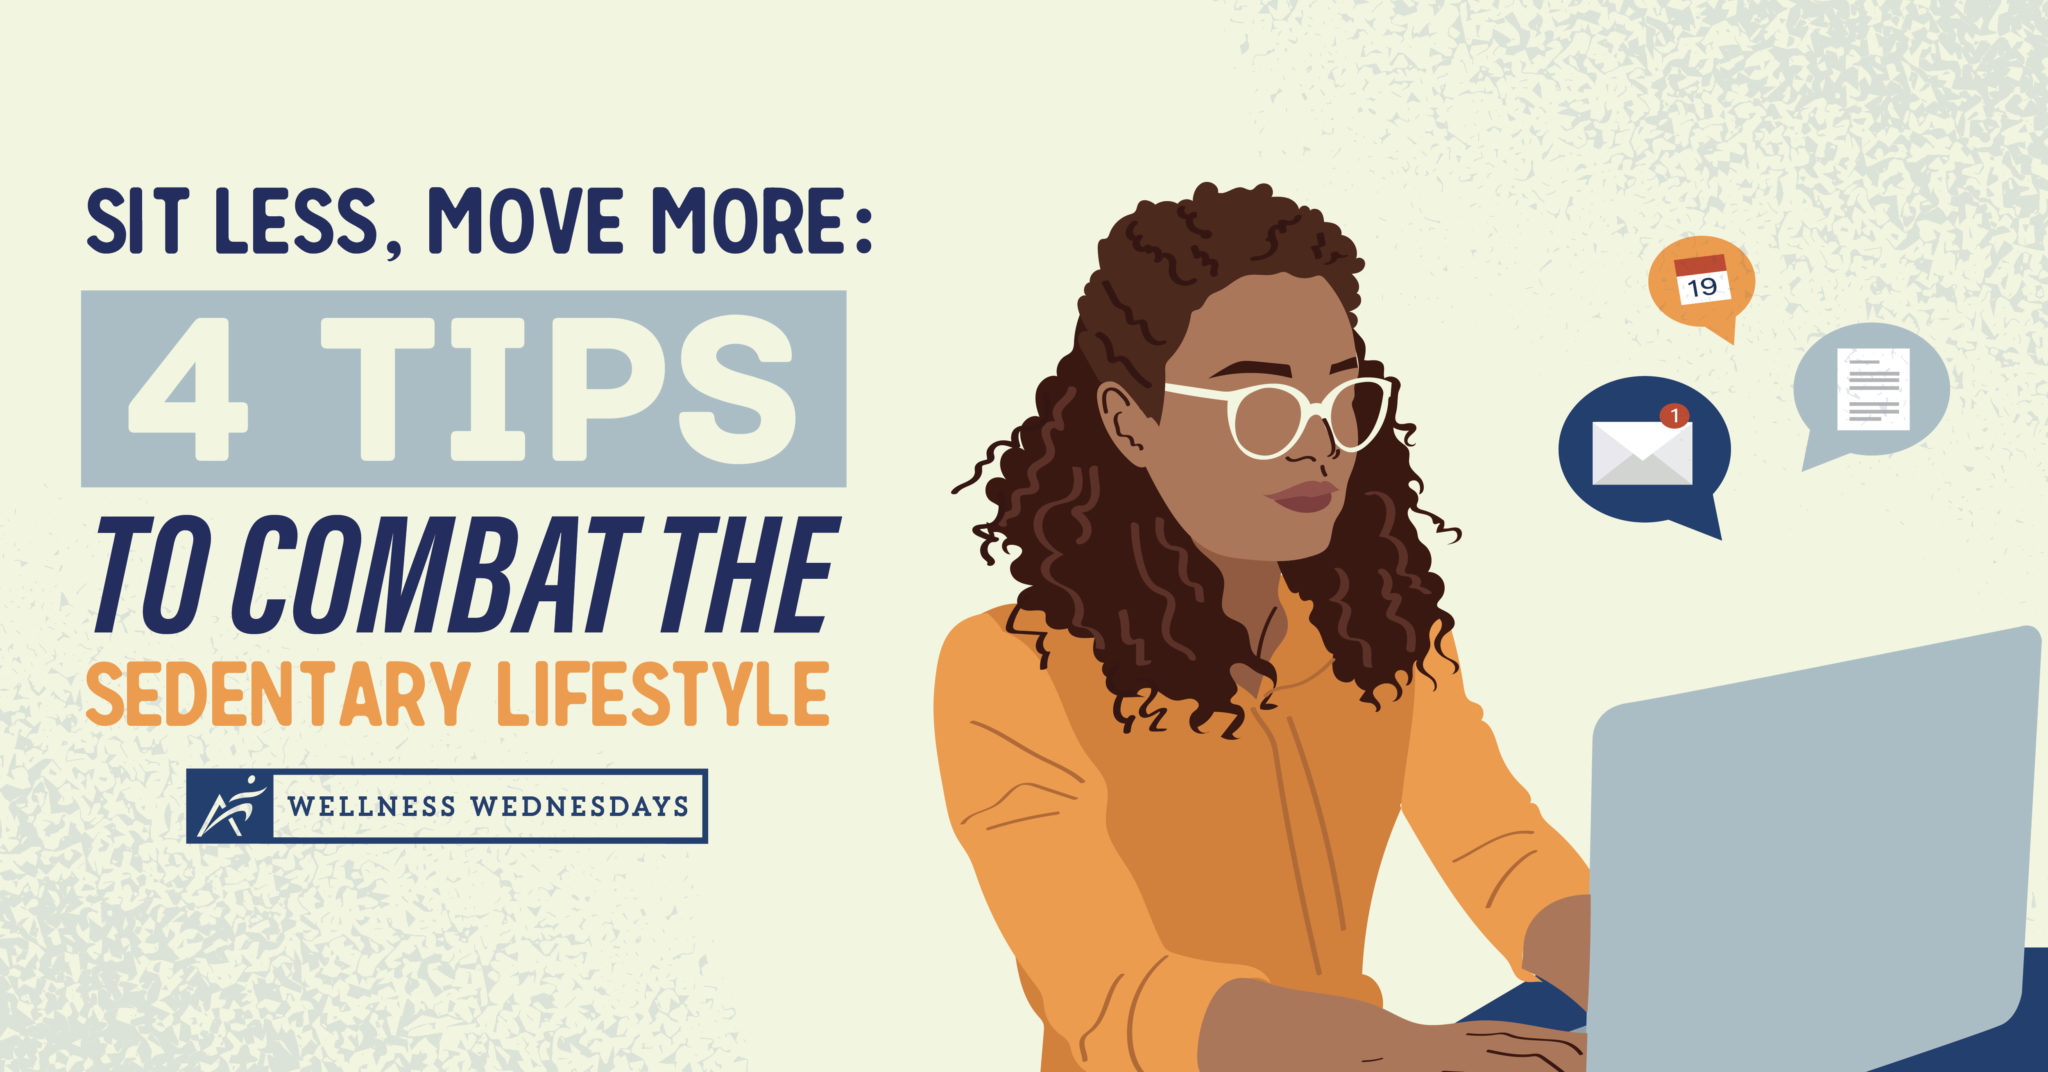 Sit Less, Move More: 4 Tips to Combat the Sedentary Lifestyle